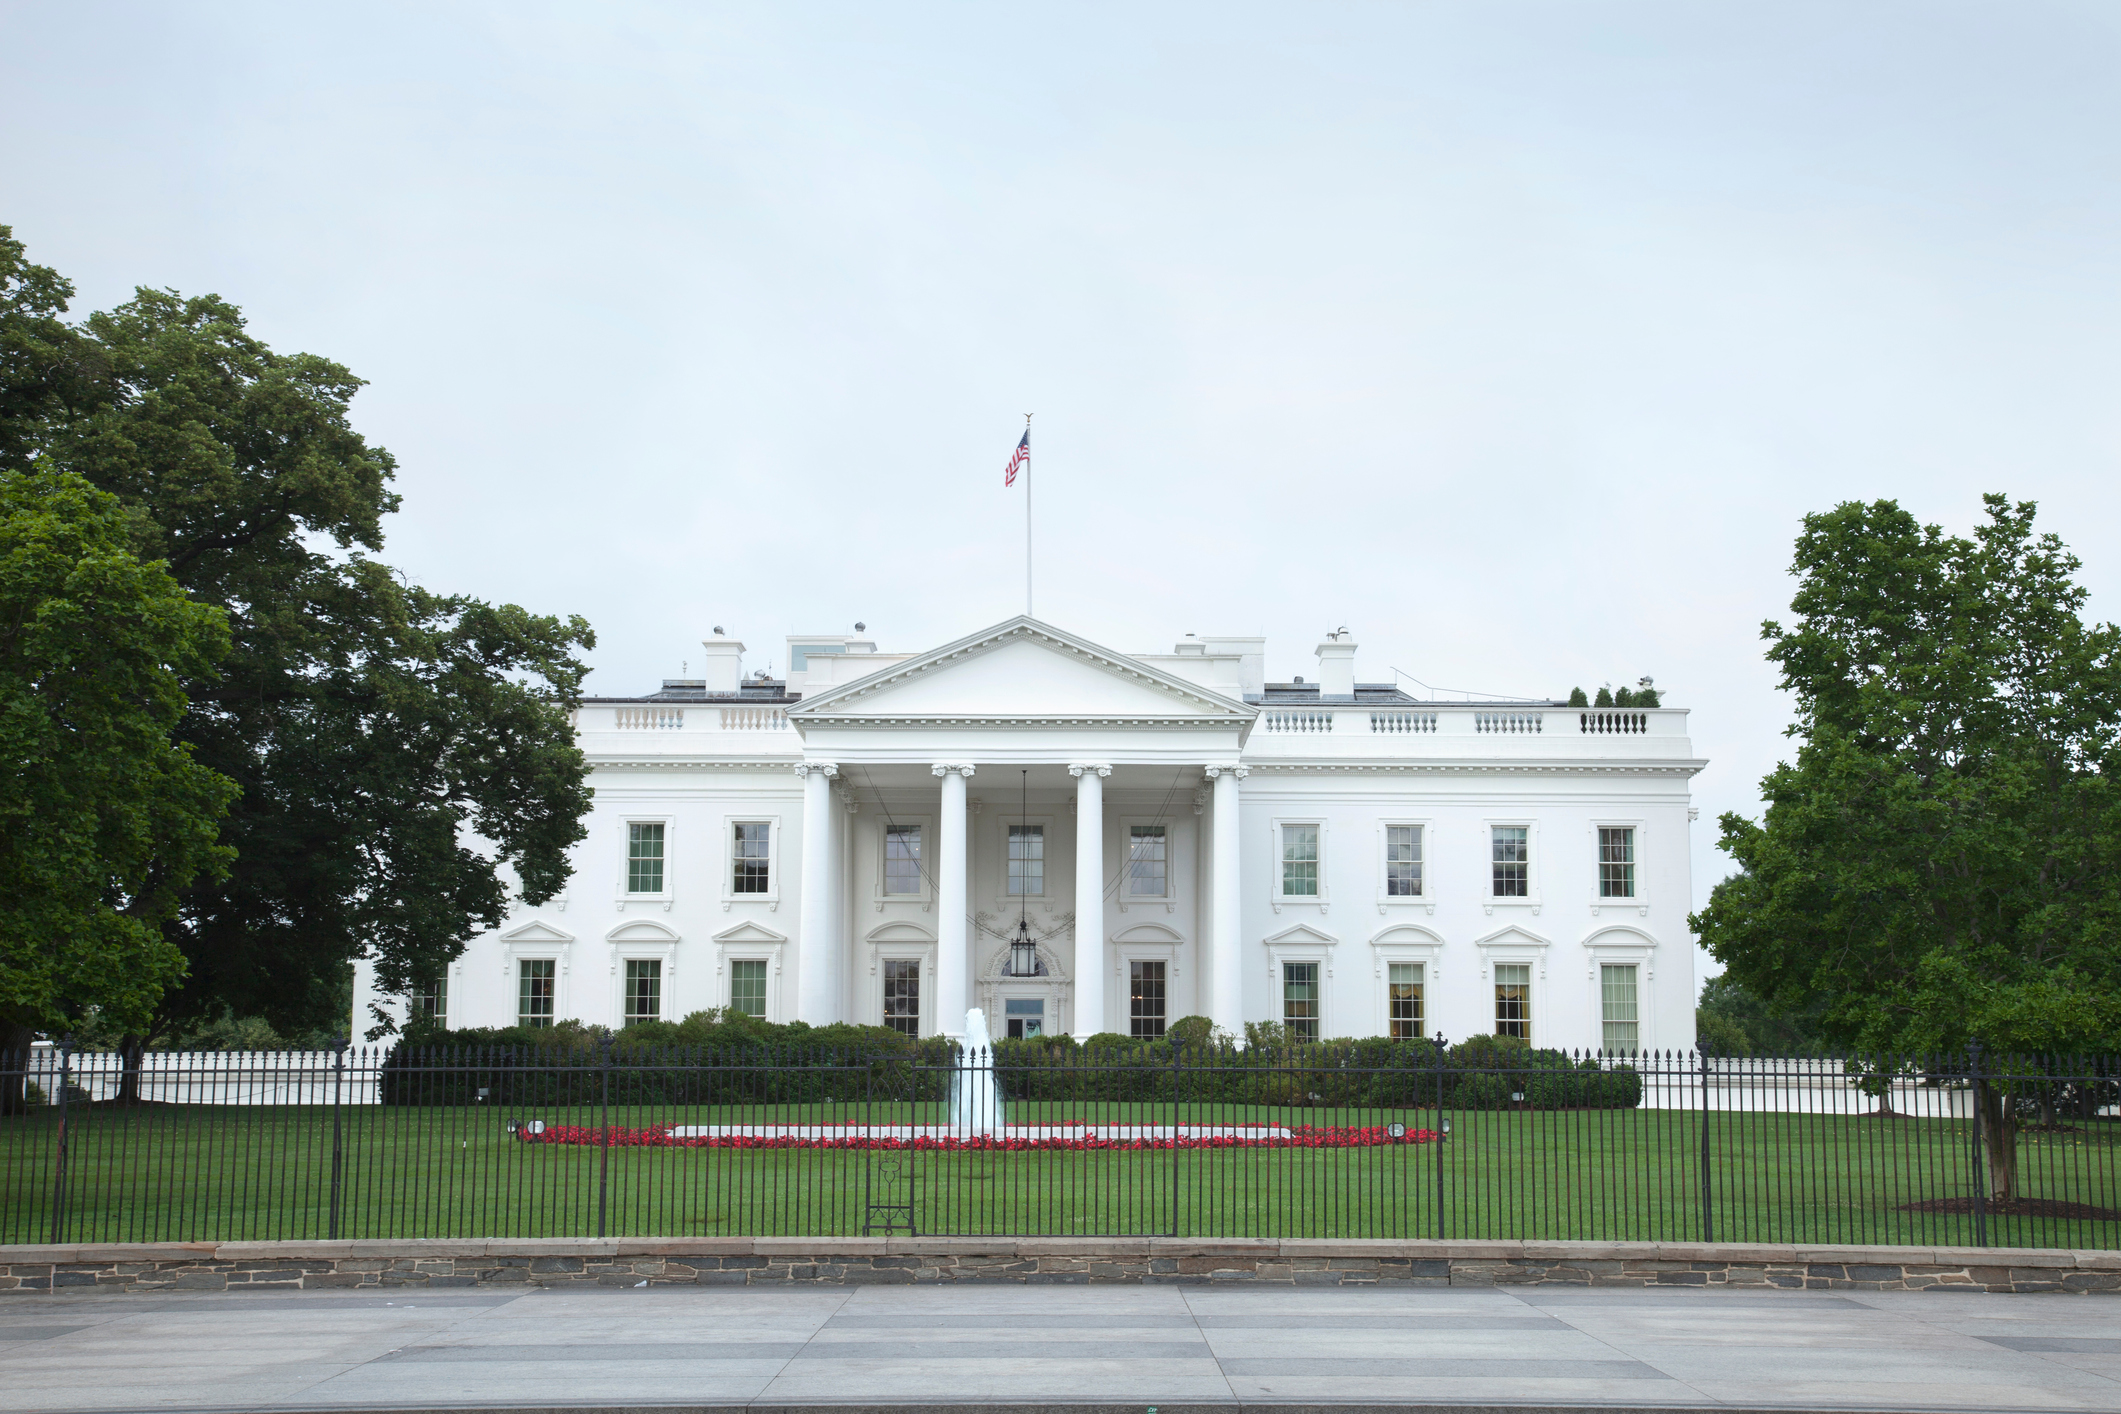 Exterior Of White House Against Sky In City